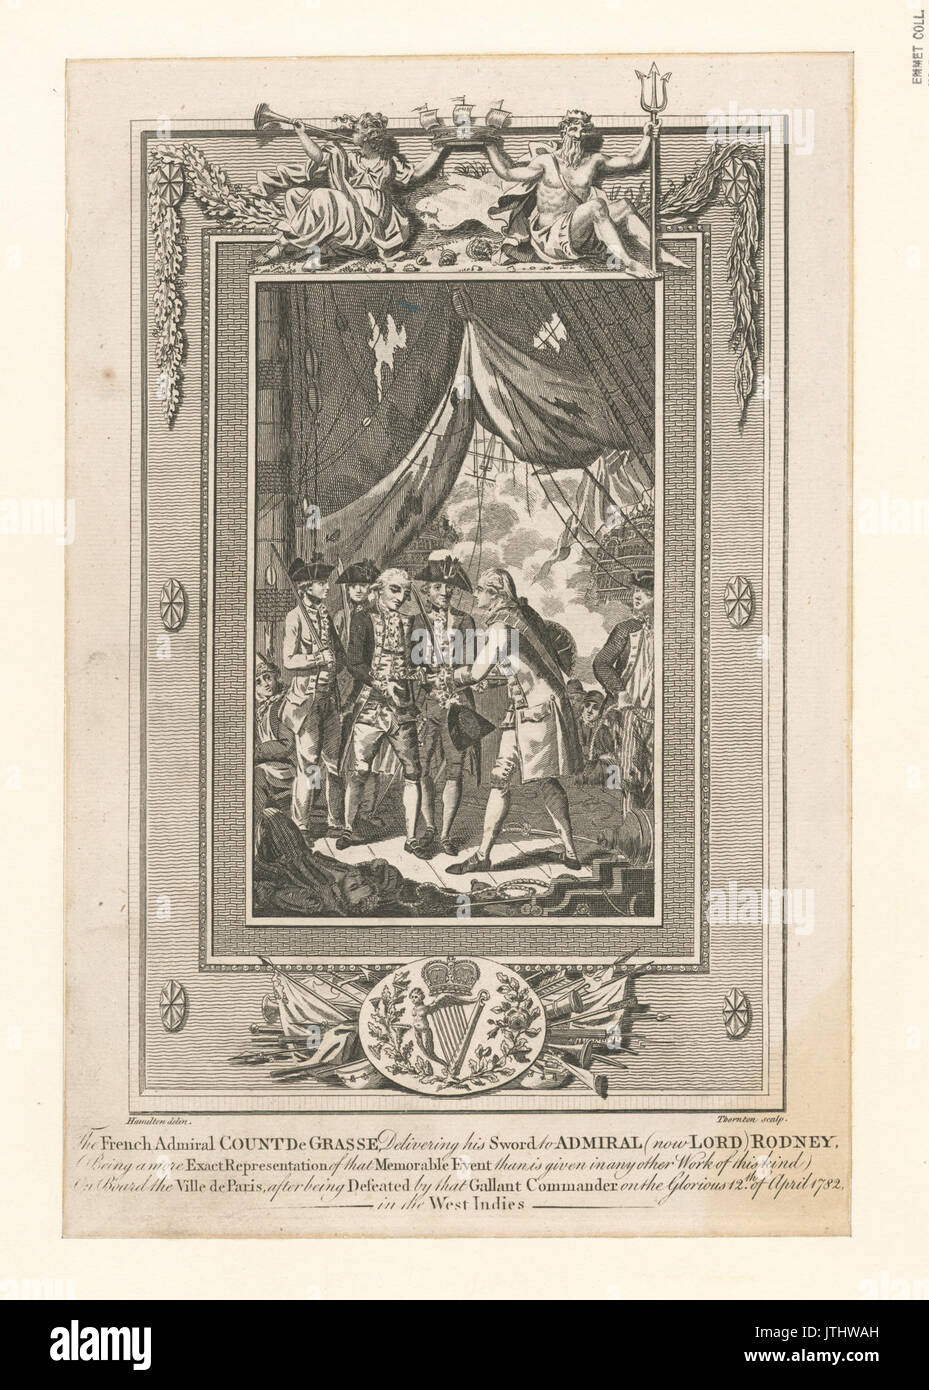 The French Admiral Count de Grasse (NYPL Hades 253672 478528) Stock Photo